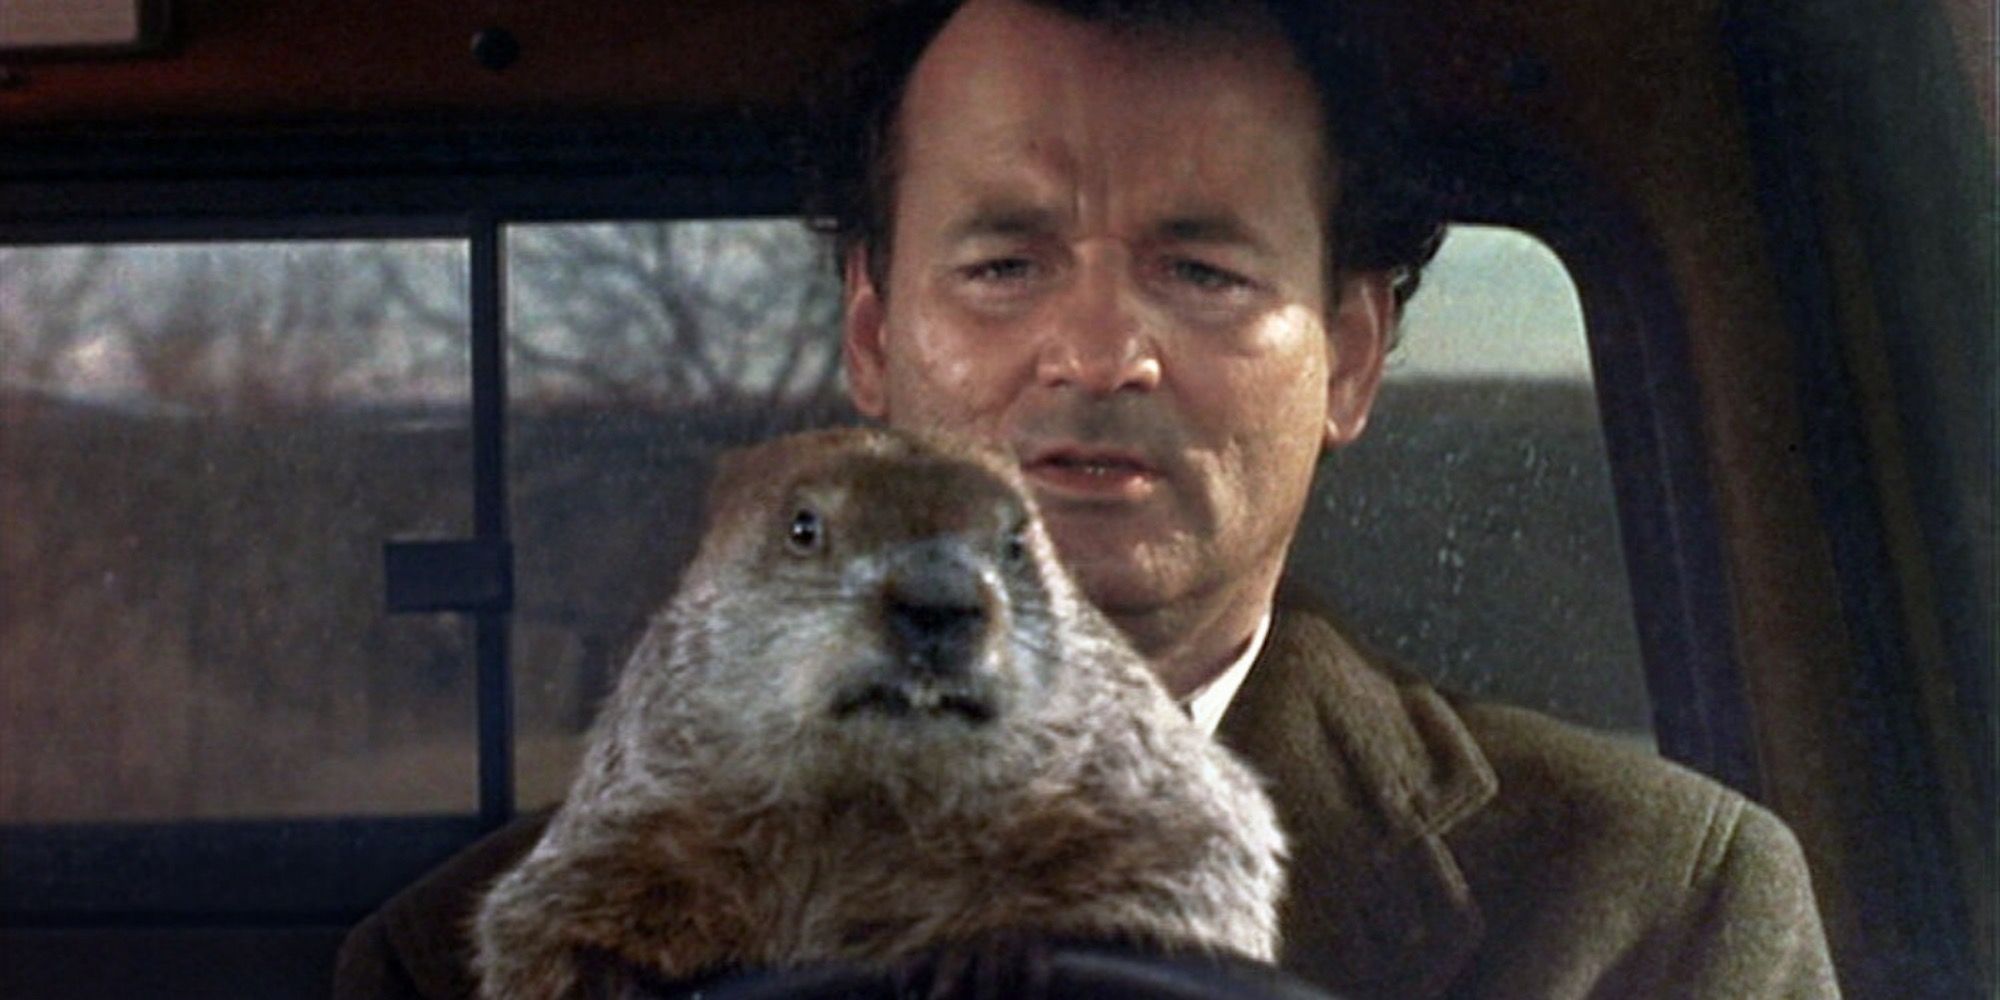 Phil with a groundhog in Groundhog Day